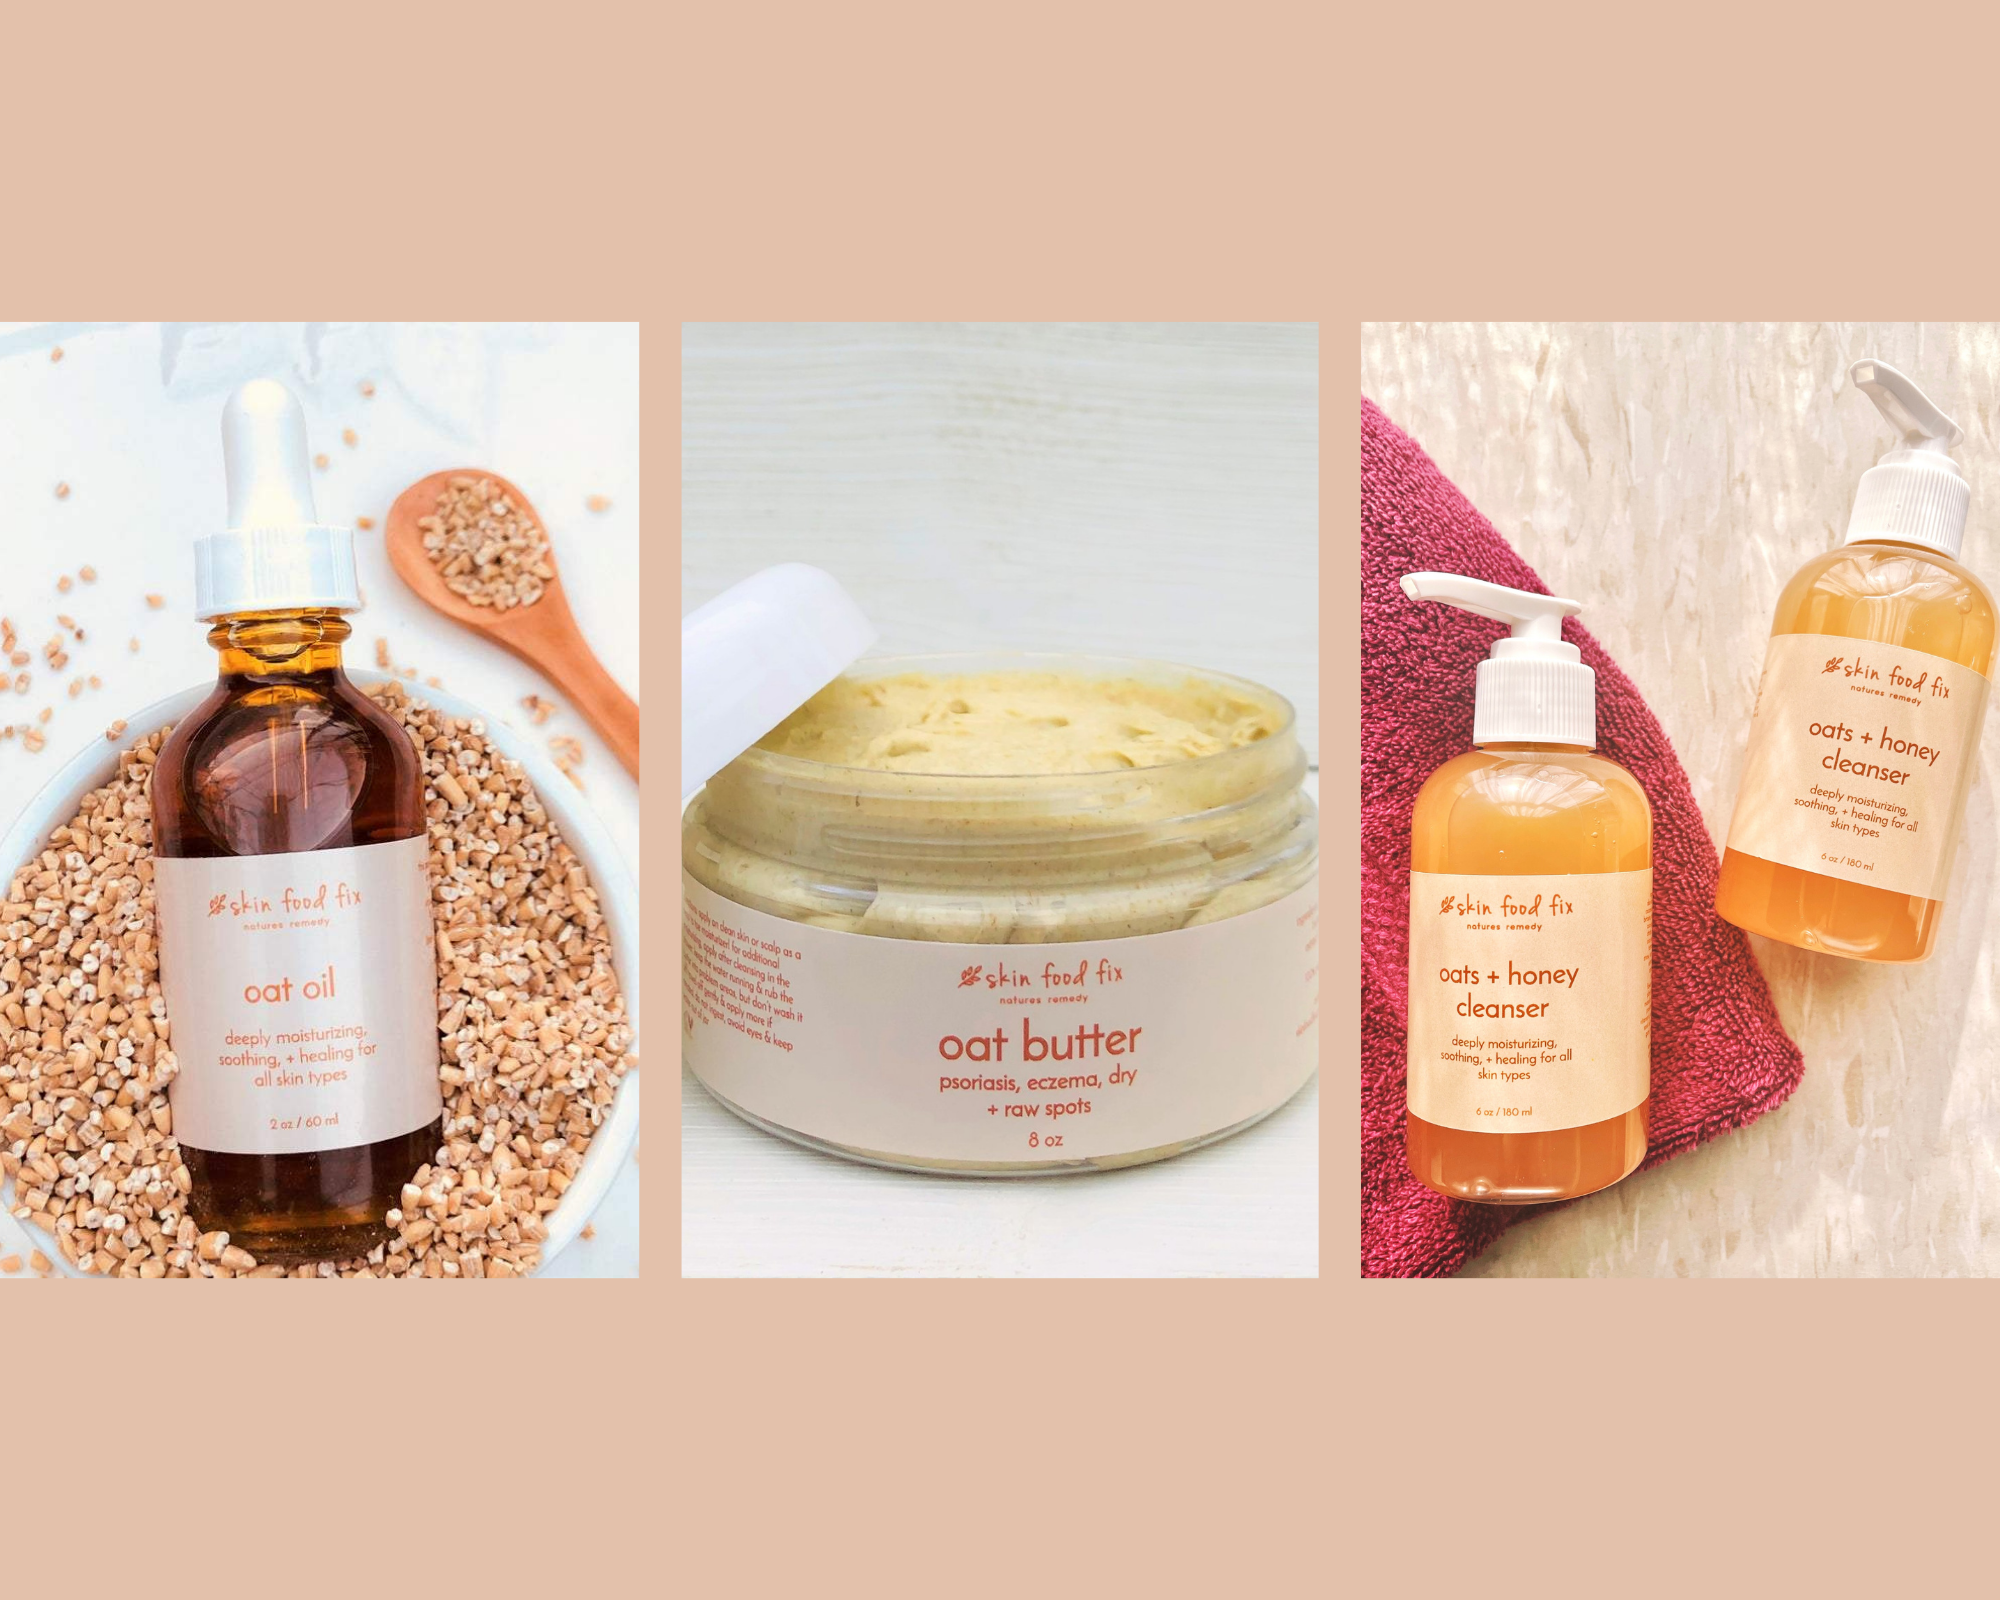 oat oil skin and hair products